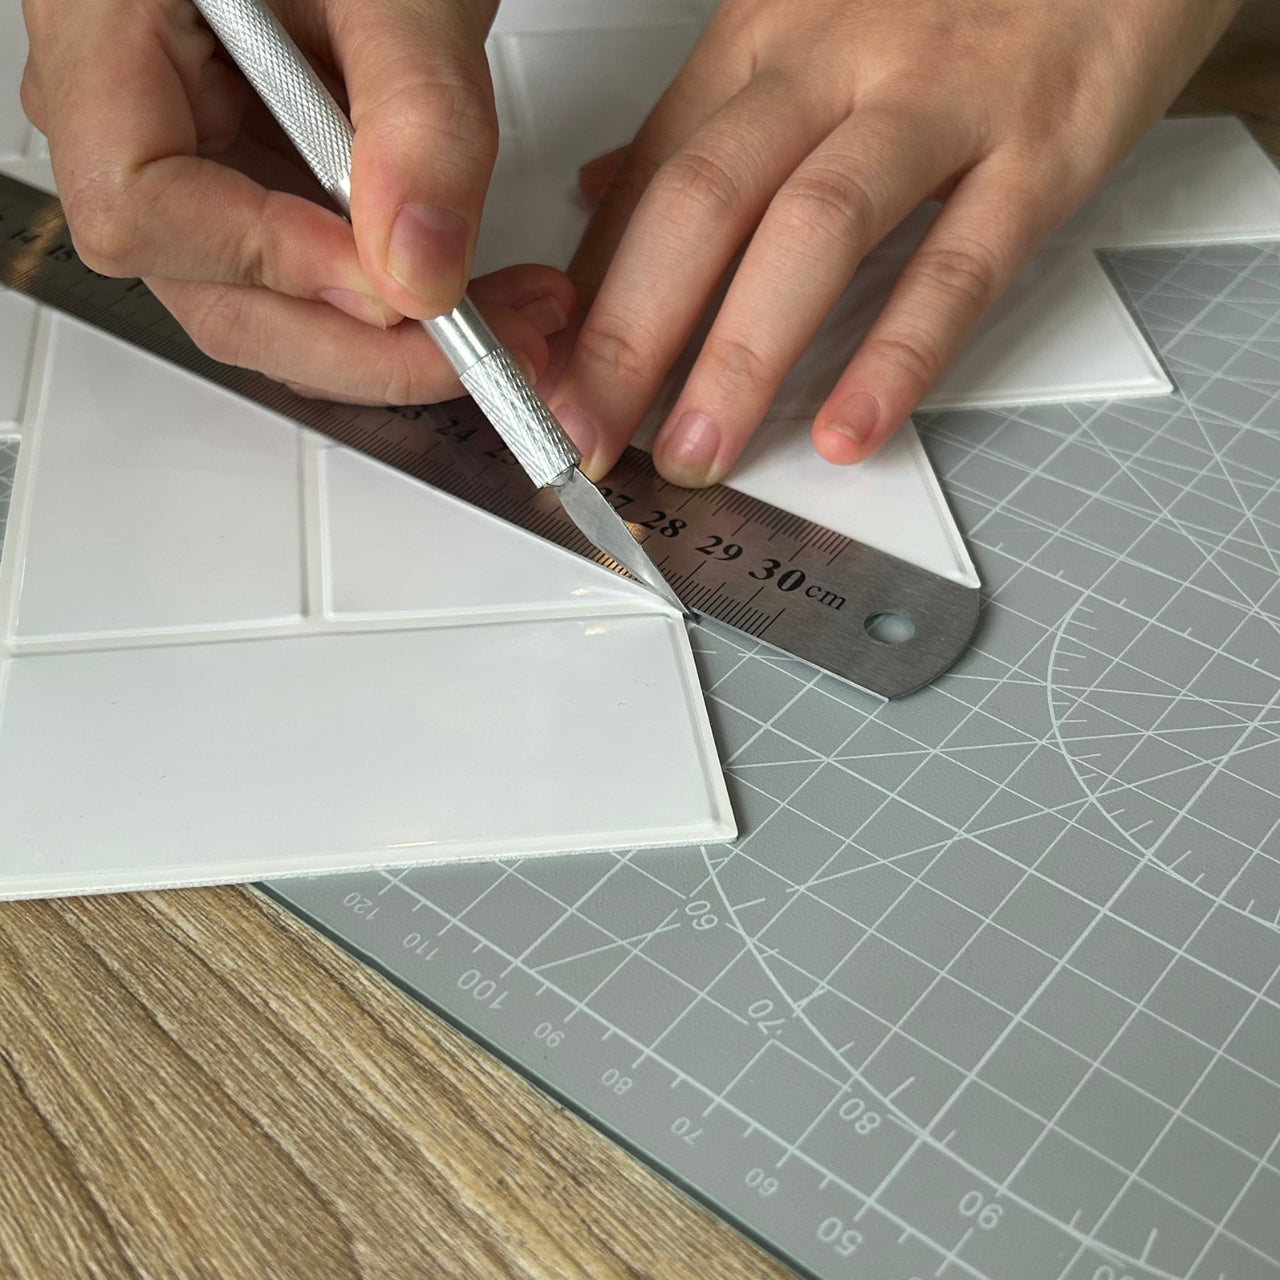 Craft knife following edge of metal edge ruler to cut peel and stick wall tiles